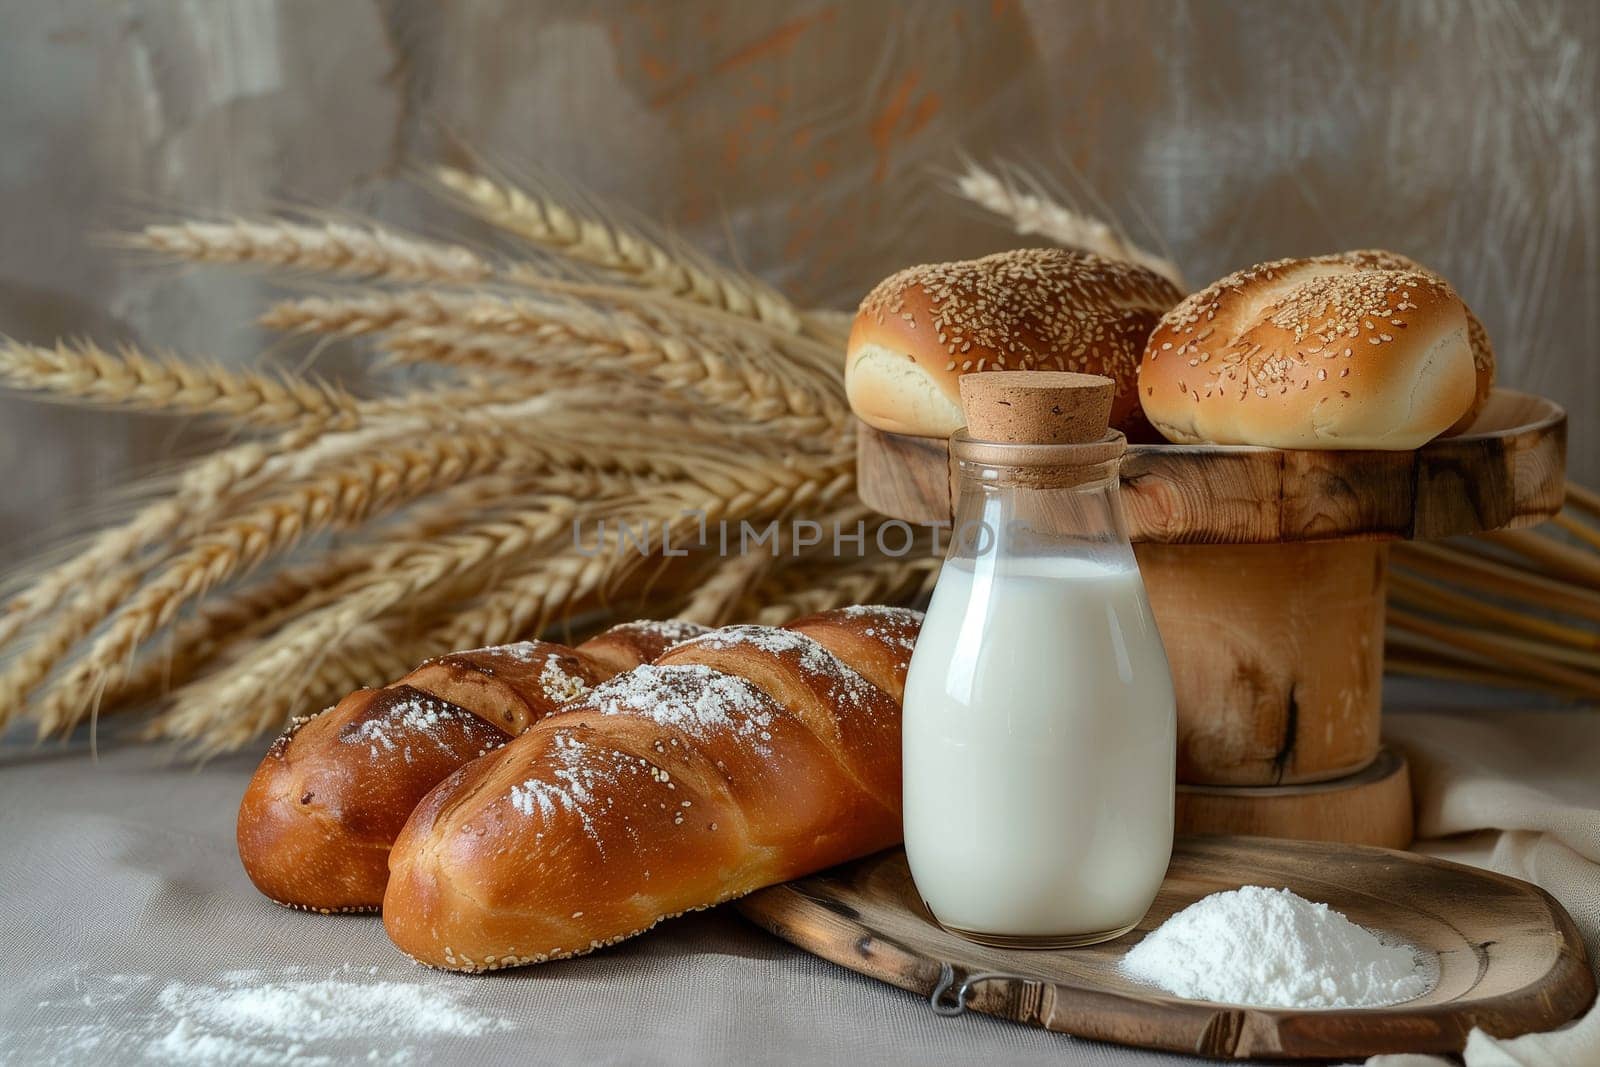 Challah bread, a bottle of milk, and a bowl of cottage cheese, evocative of Shavuot, are arranged on a table with wheat stalks in the background.